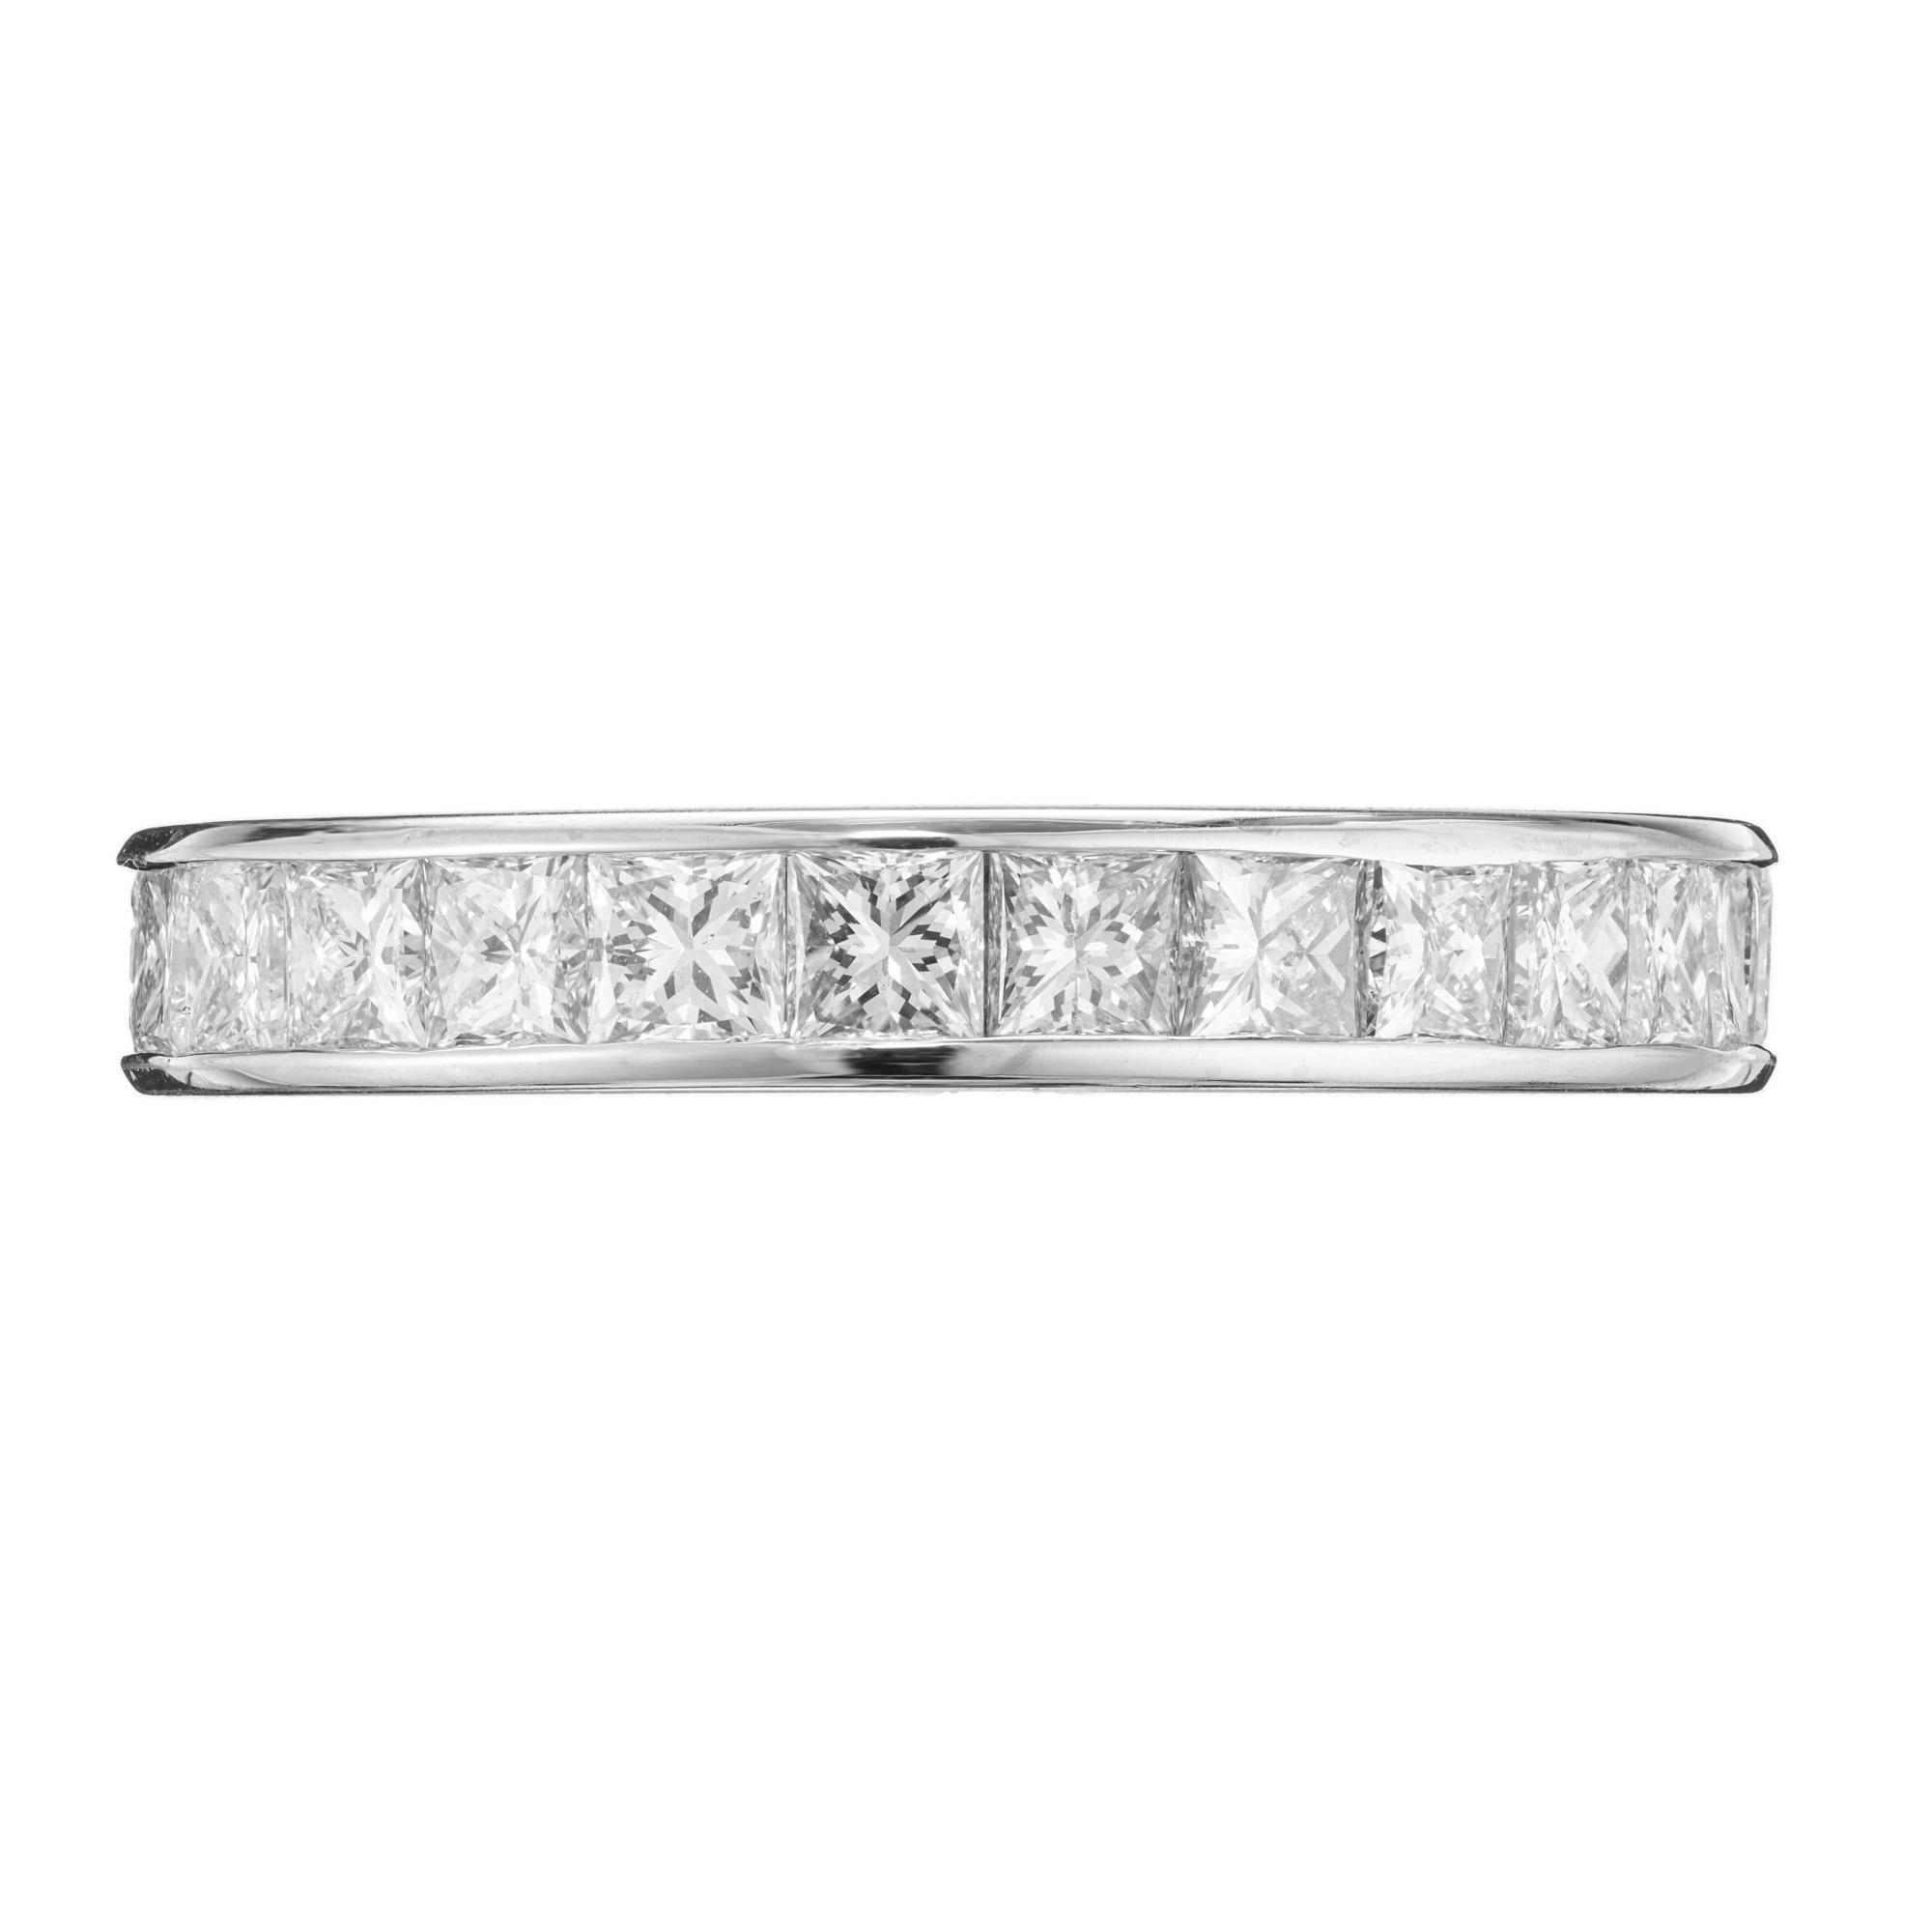 Classic solid Platinum Princess cut Diamond Eternity ring from Byard F. Brogan. 22 Princess cut diamonds totaling 2.40cts. channel set in a platinum eternity band. The diamonds have great brilliance. Not sizable but can be ordered in any size. 